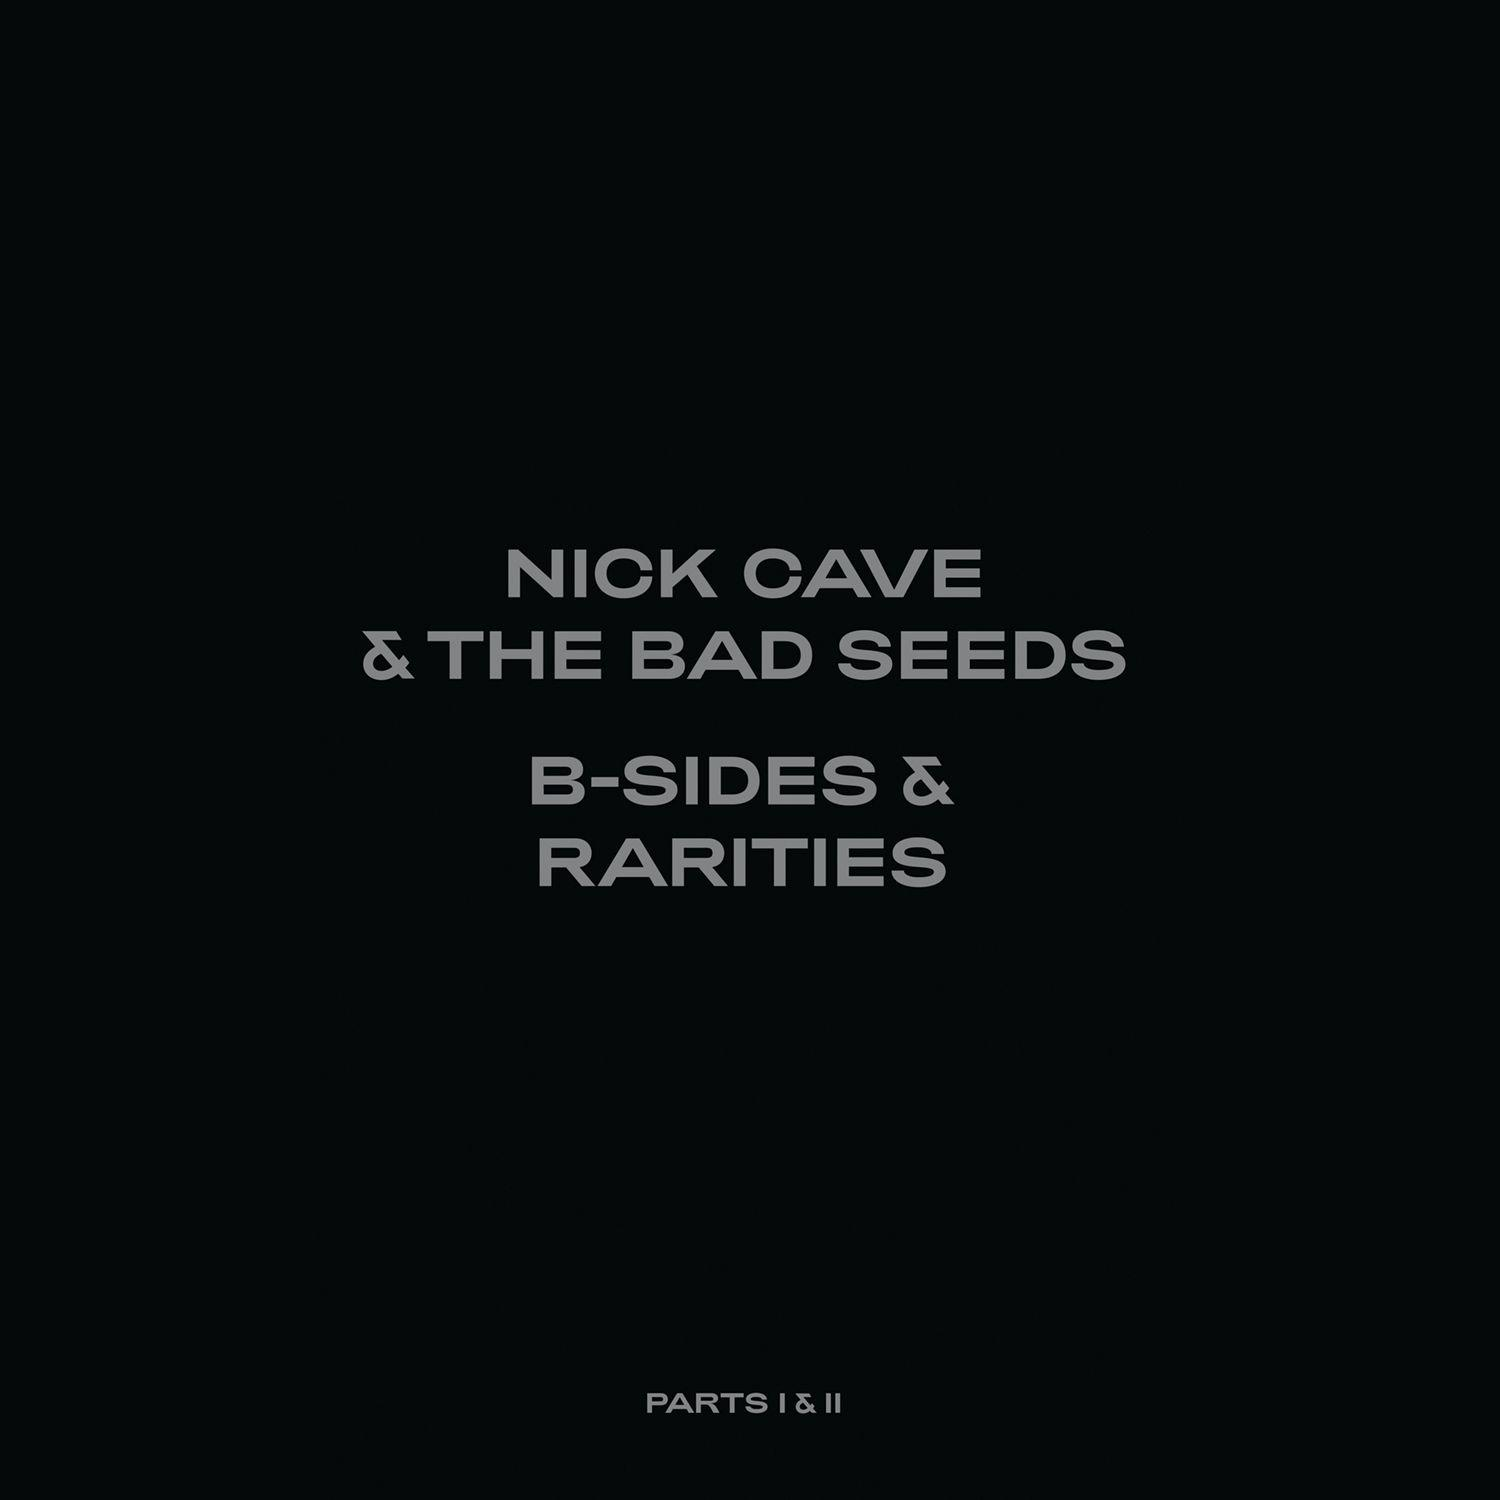 Cave (Vinyl) - Seeds - And & And Limitierte B-Sides Edition Rarities I Bad The II) Nick (Part